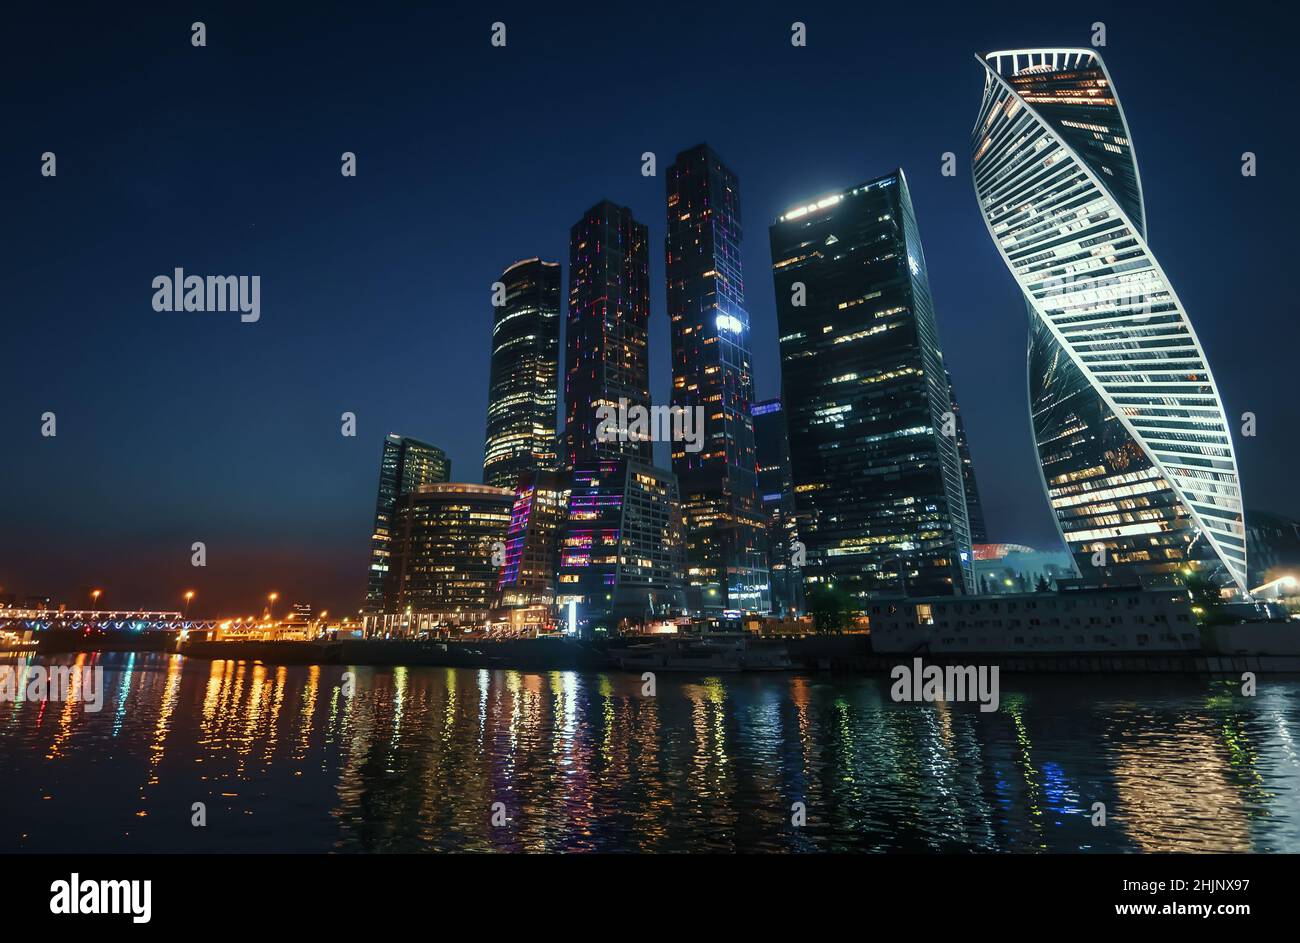 Moscow City skyscrapers at Night. Famous International Business Center. Stock Photo